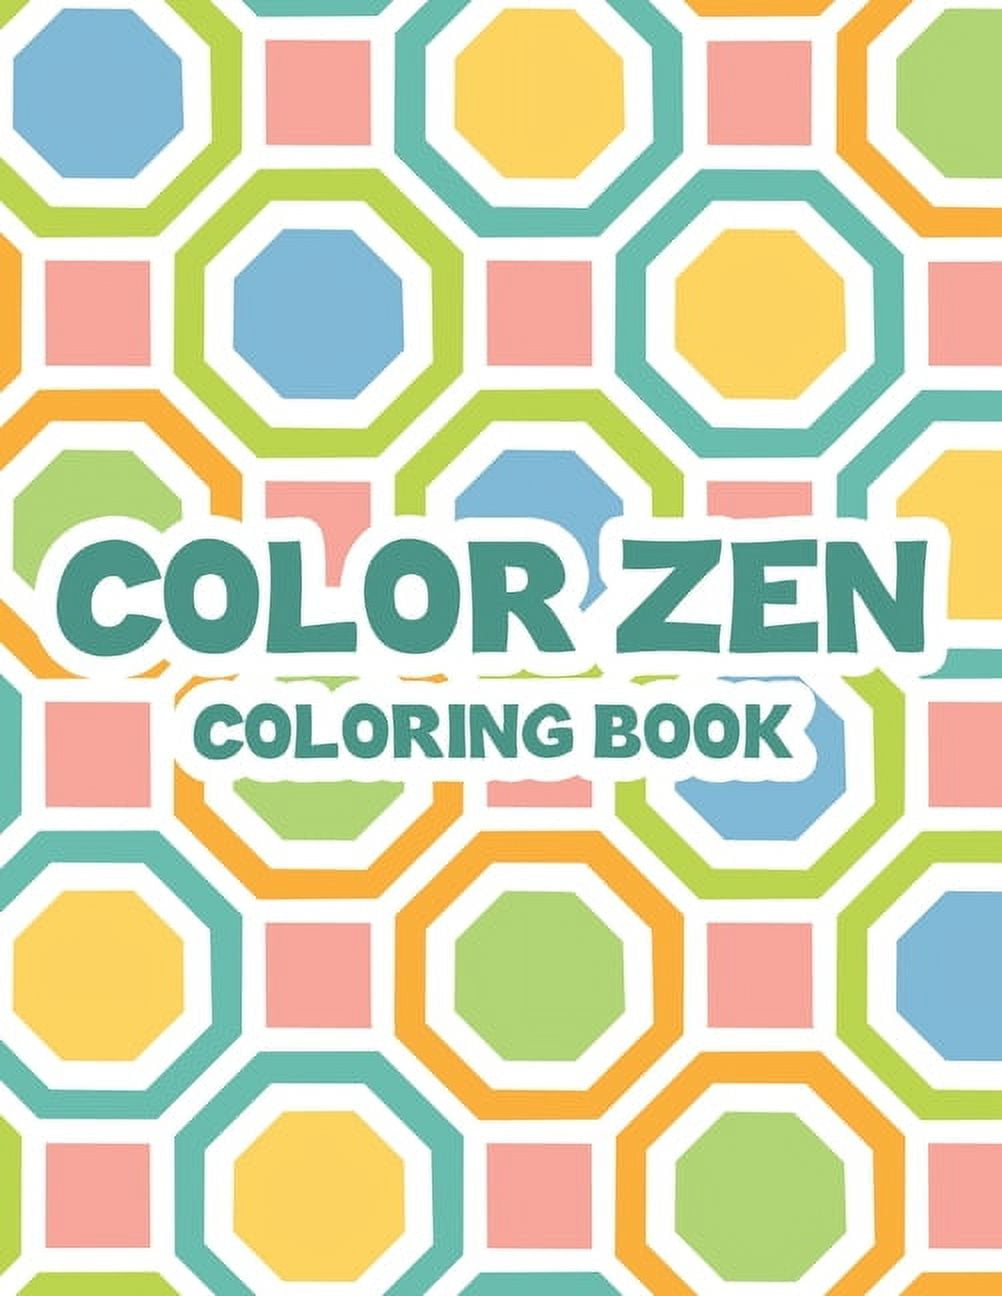 Zen and the Art of Coloring